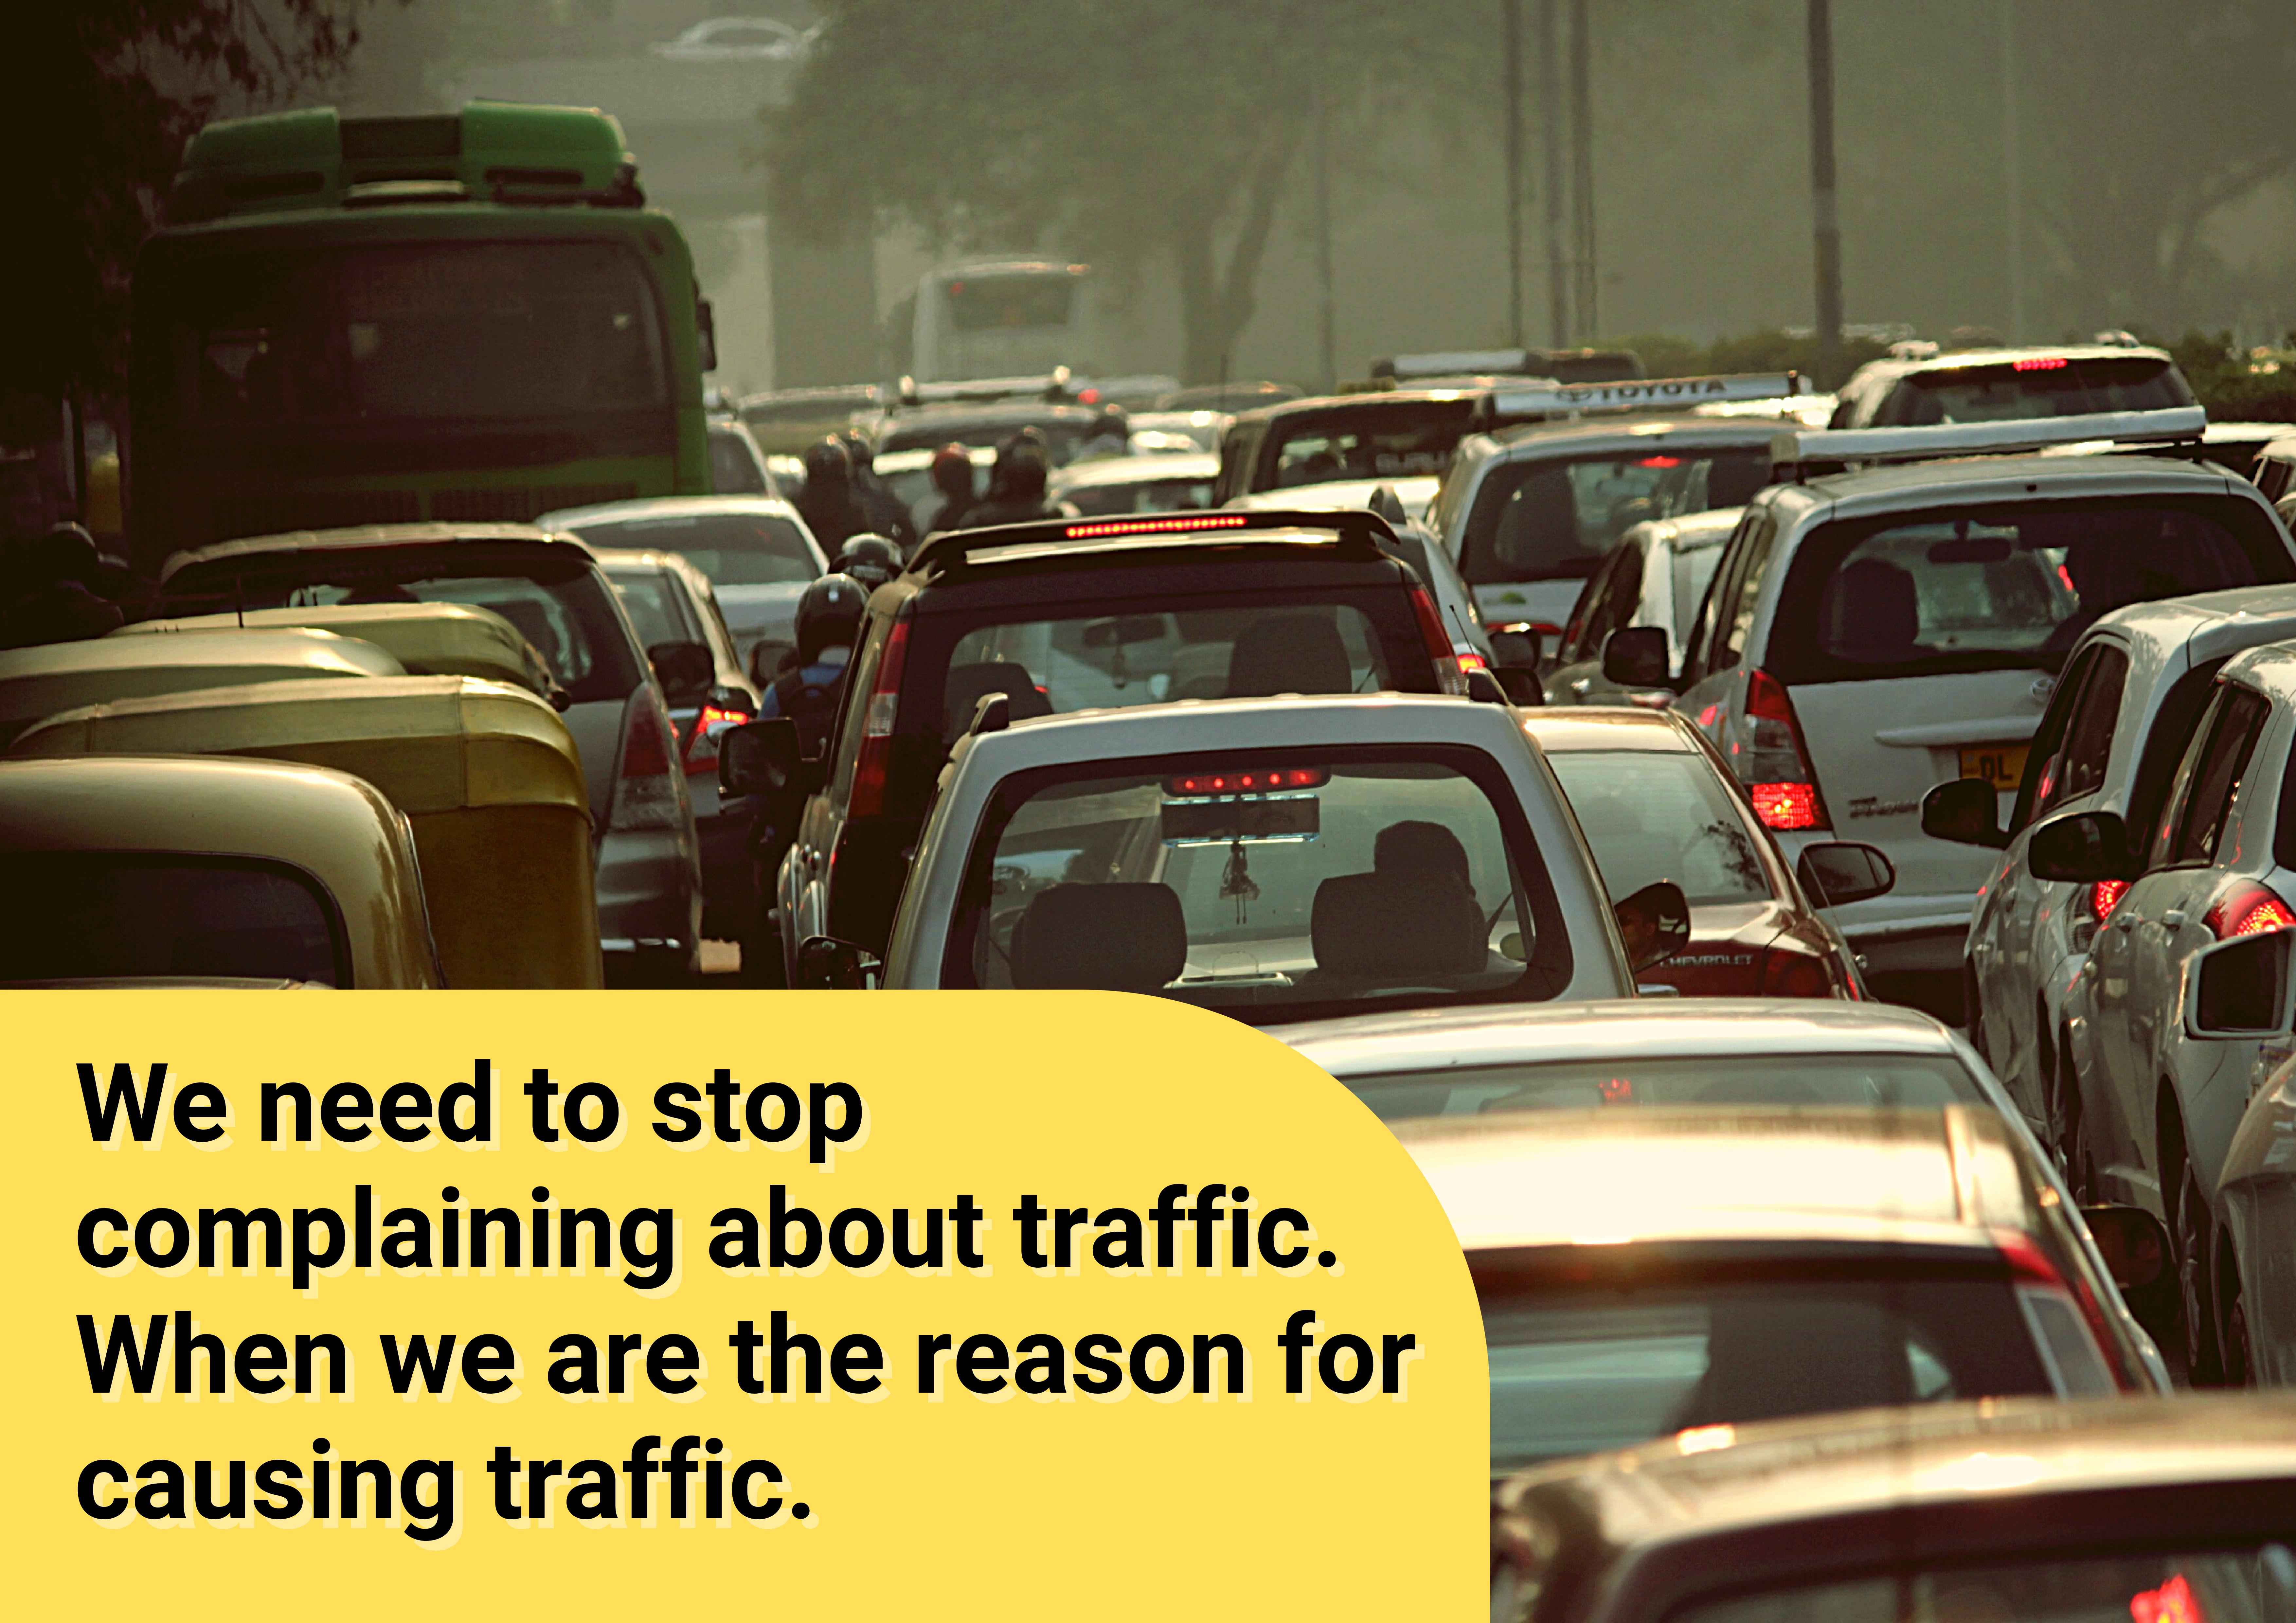 We need to stop complaining about traffic when we are cause traffic.